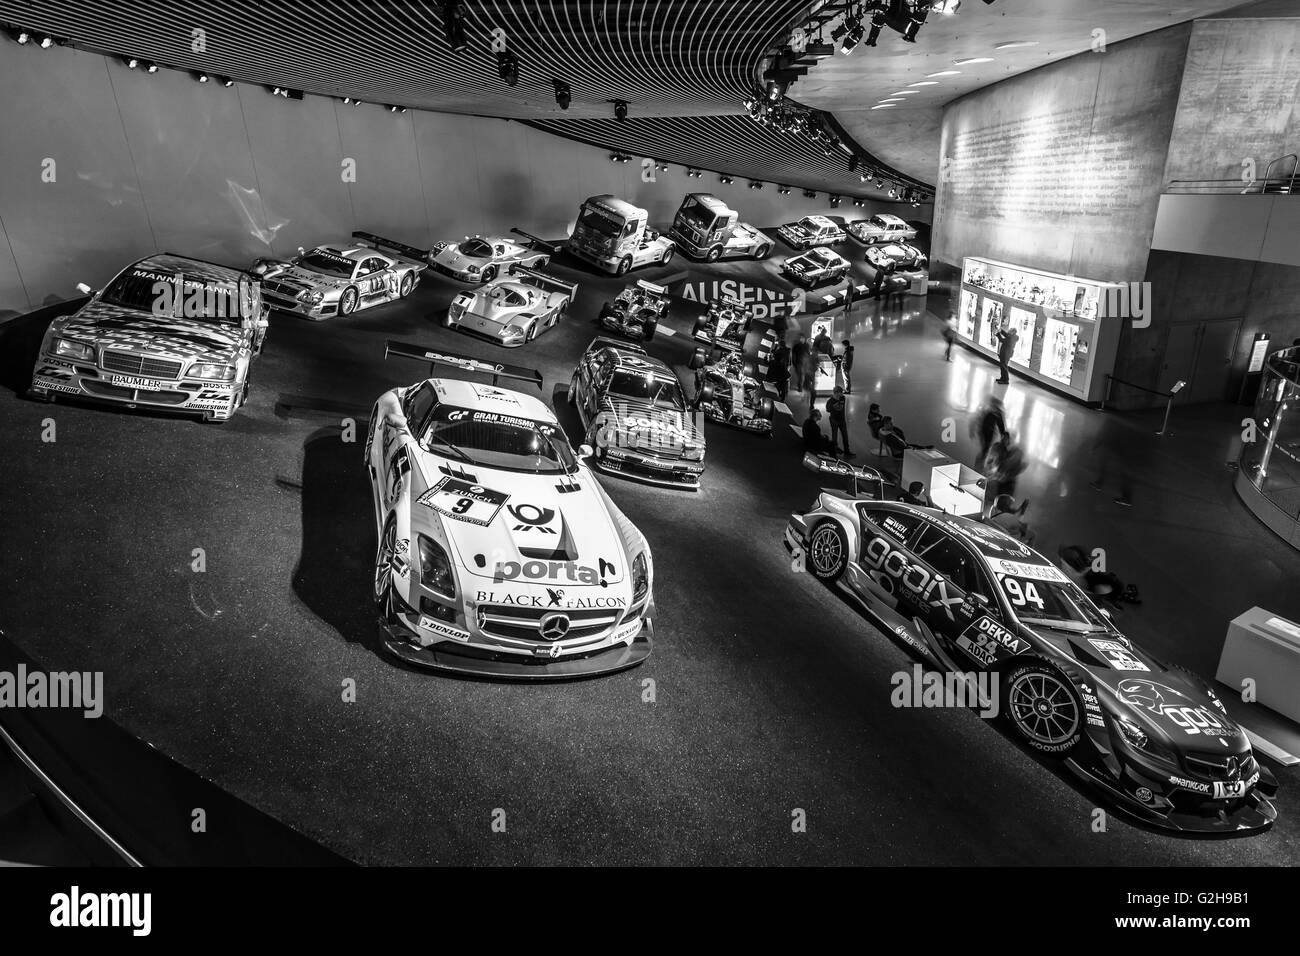 STUTTGART, GERMANY- MARCH 19, 2016: Gallery of sports and racing cars of different classes. Black and white. Stock Photo